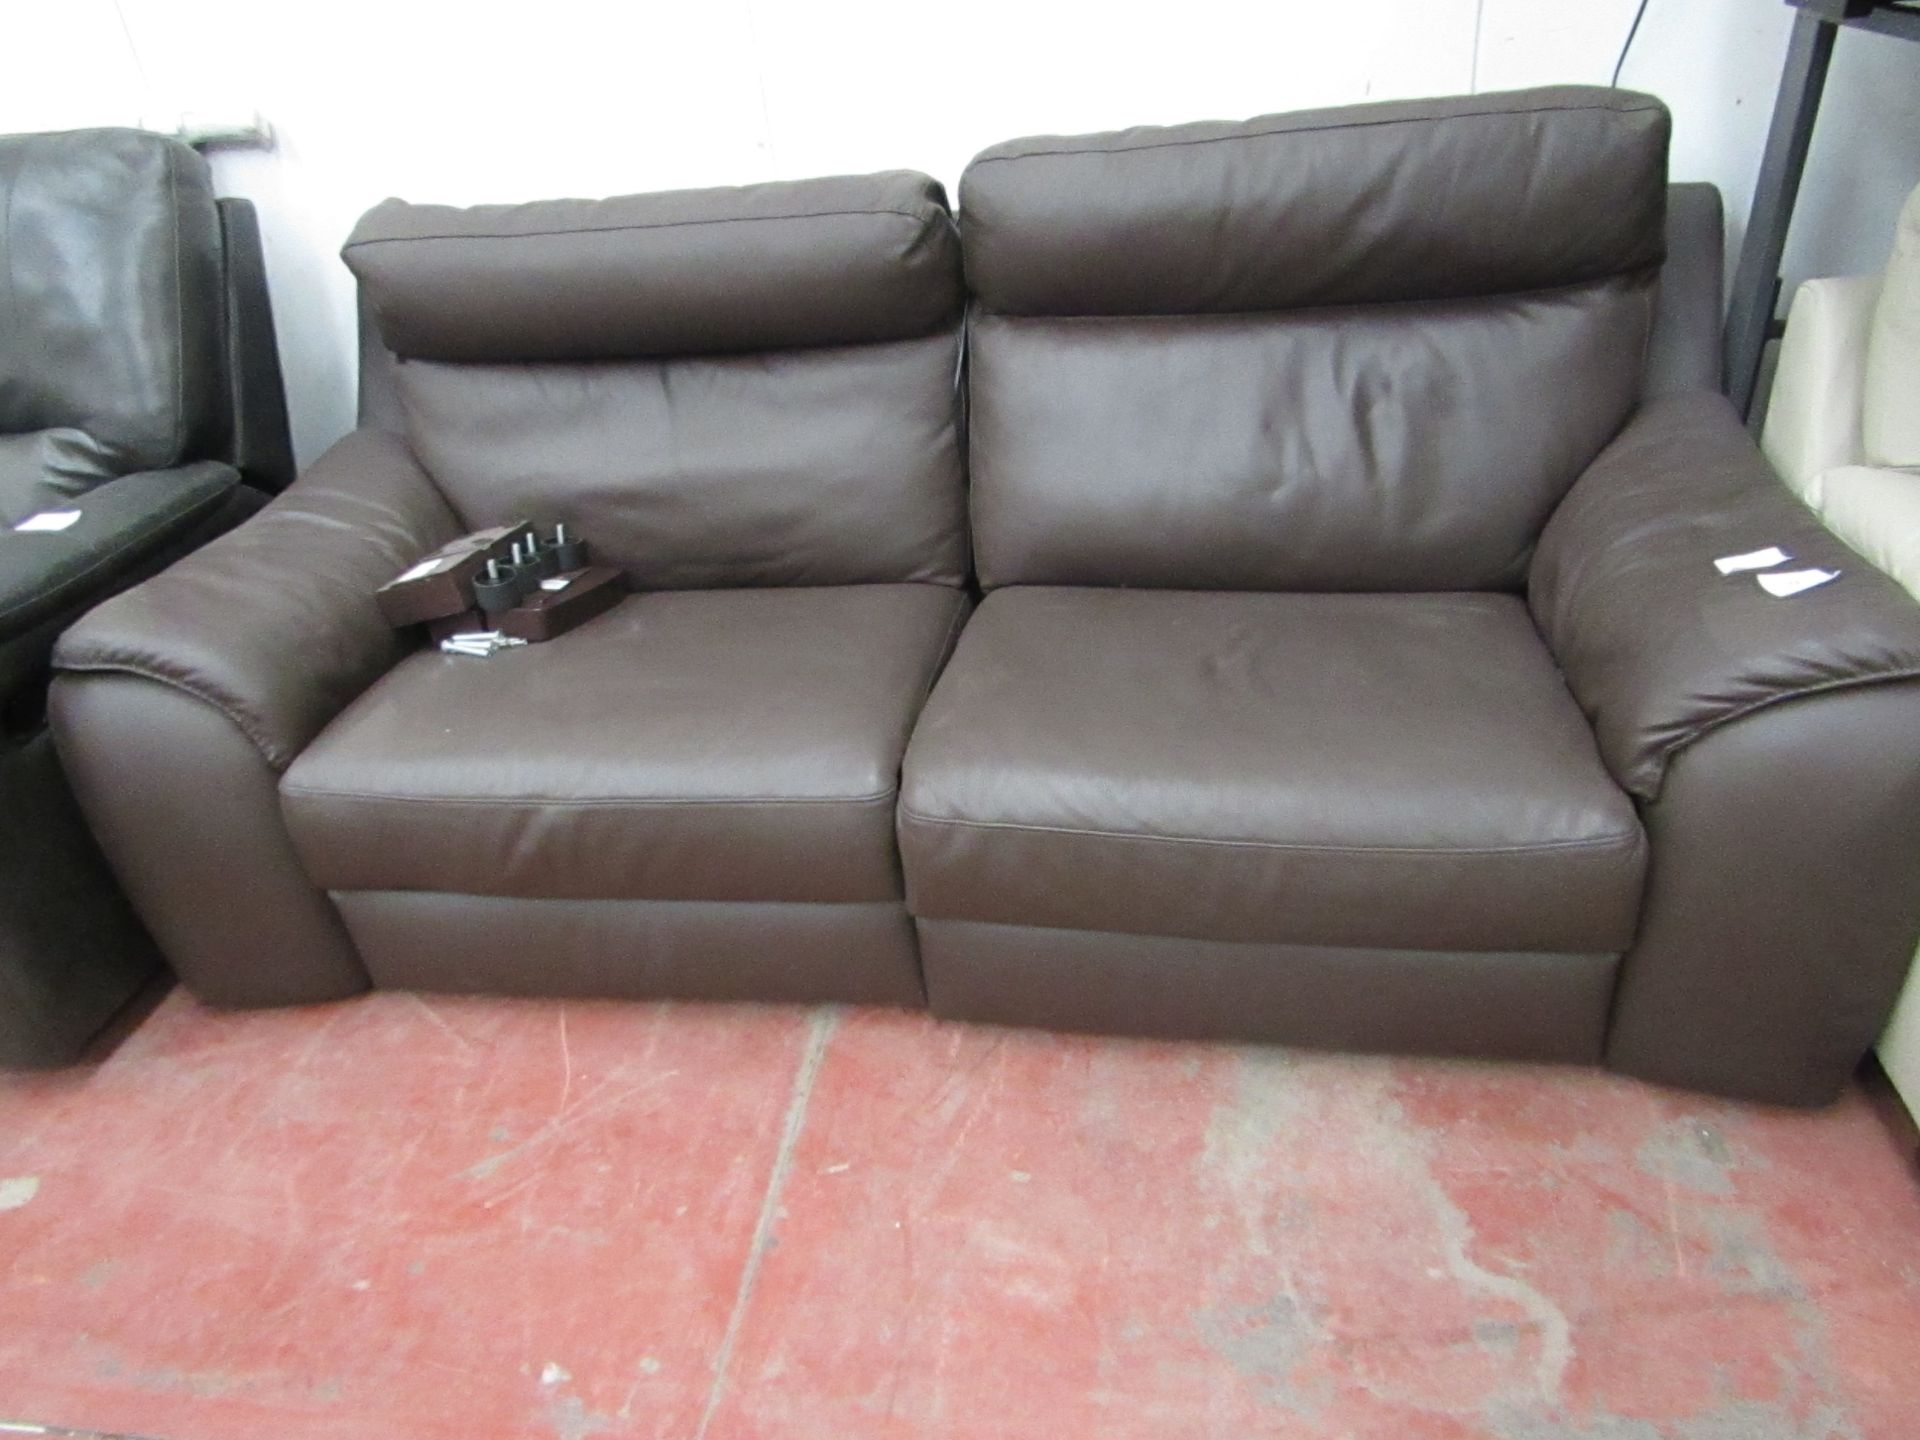 Calia 2 seater electric reclining brown Italian leather sofa, one side works but the other has a